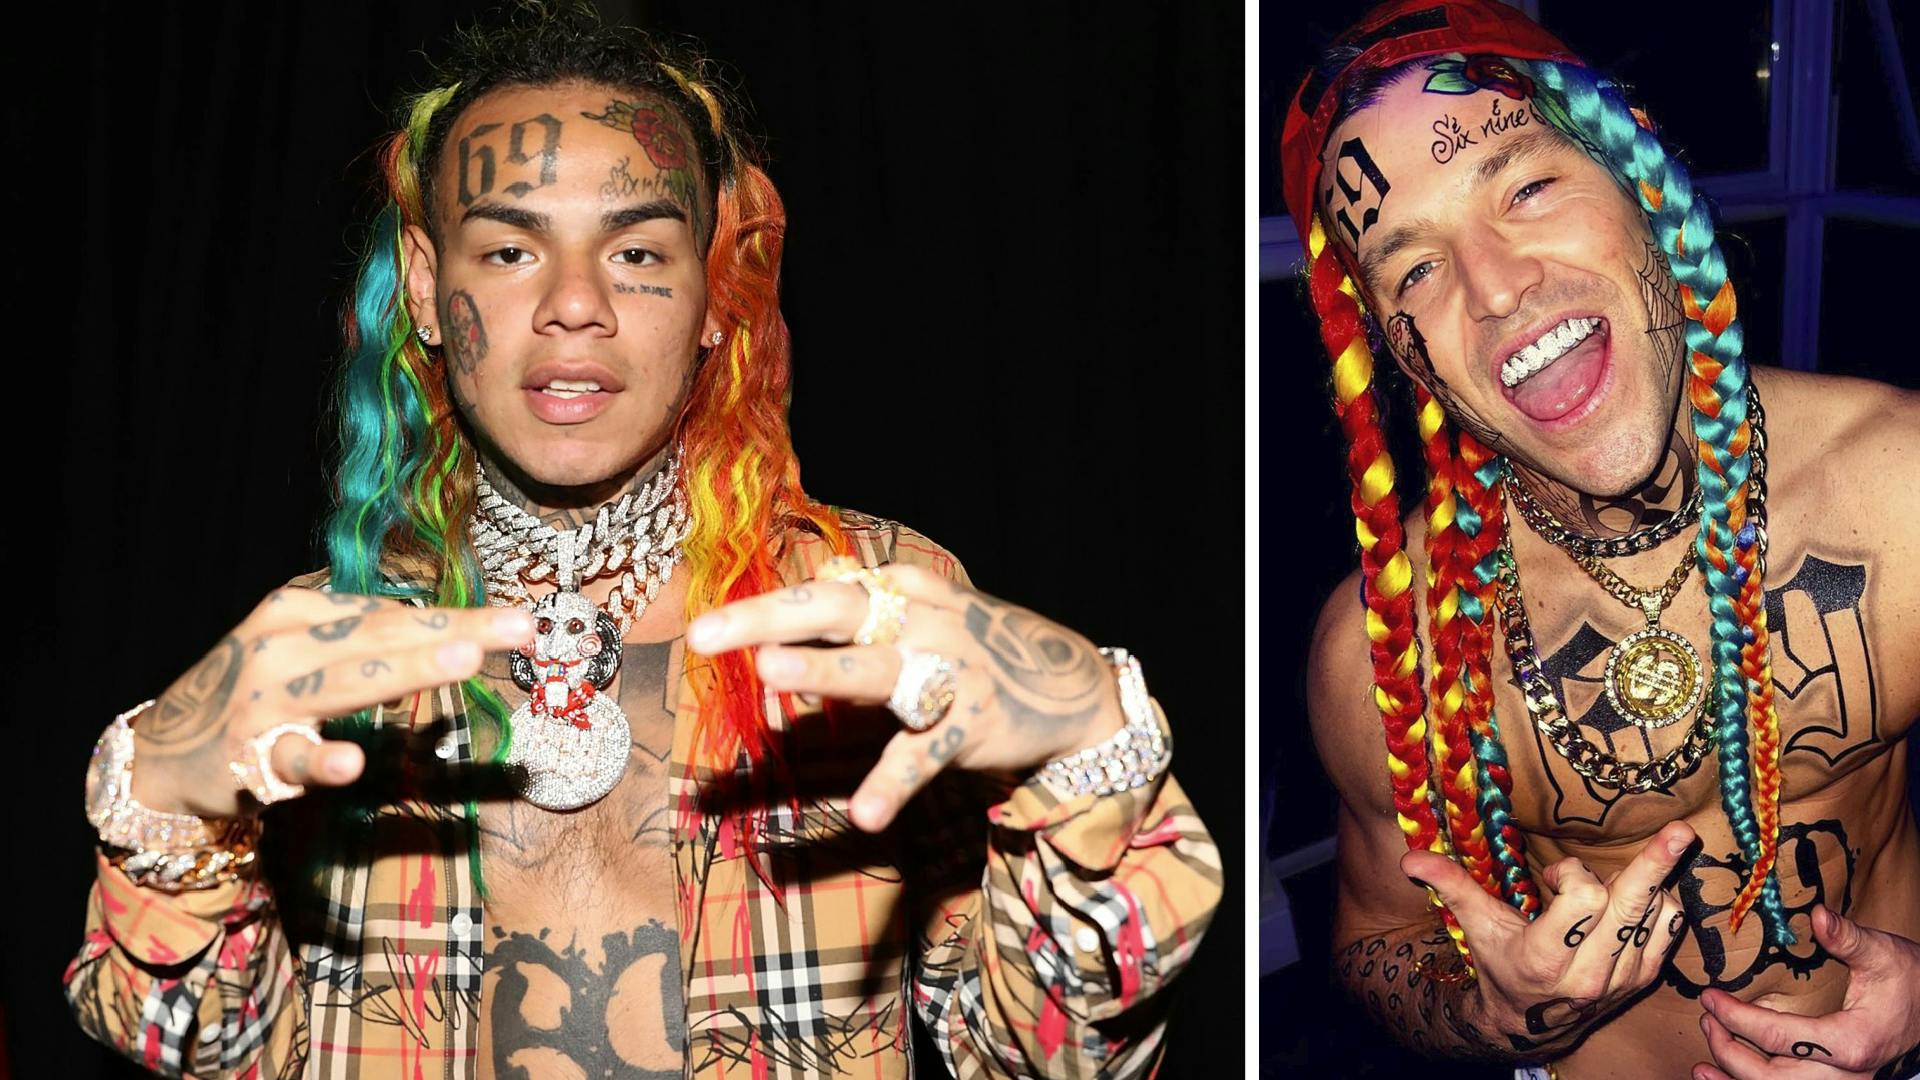 6ix9ine sixnine 69 tekashi tekashi69 tekashi6ix9ine  Six Nine Without  Tattoos HD Png Download  1024x14101966415  PngFind